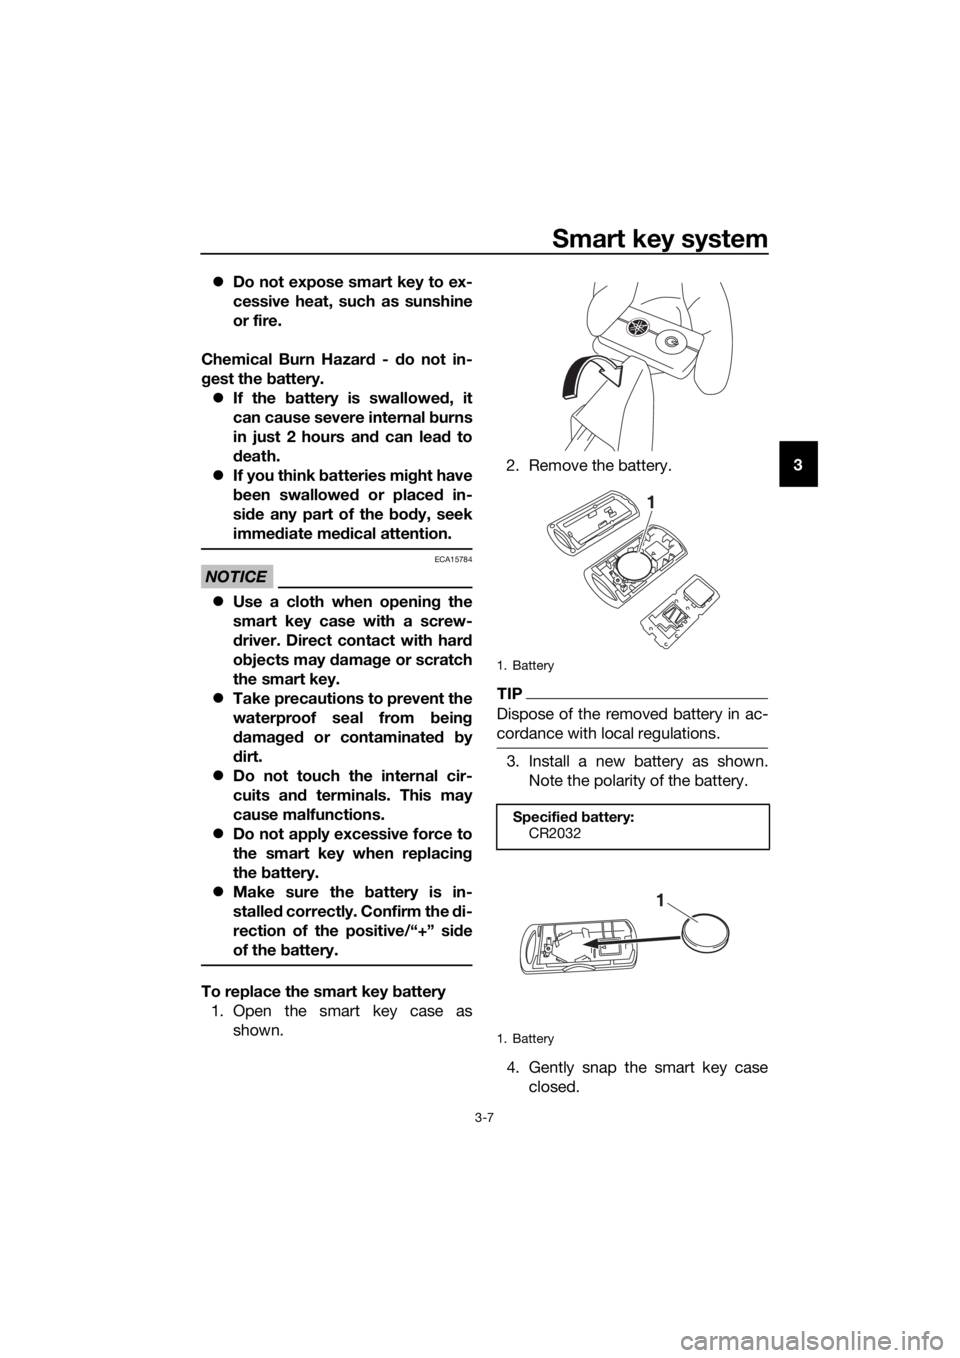 YAMAHA XMAX 300 2018  Owners Manual Smart key system
3-7
3 Do not expose smart key to ex-
cessive heat, such as sunshine
or fire.
Chemical Burn Hazard - do not in-
gest the battery.
If the battery is swallowed, it
can cause severe